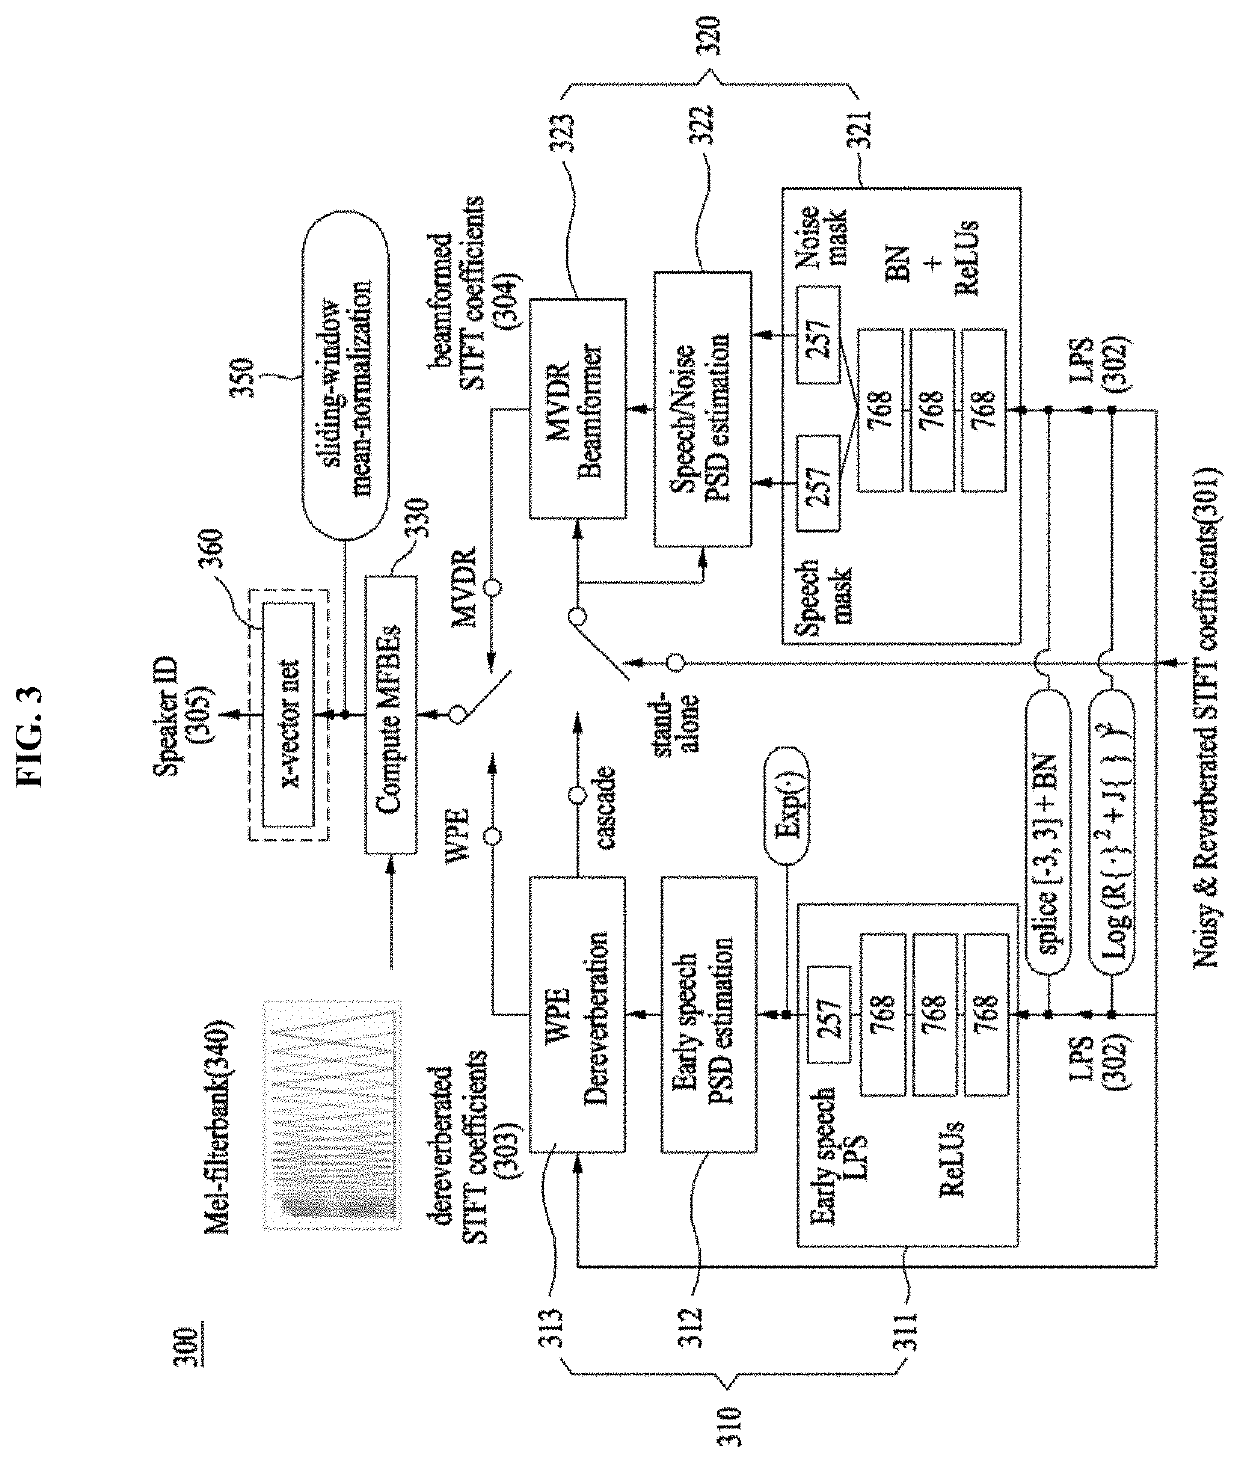 Method and apparatus for combined learning using feature enhancement based on deep neural network and modified loss function for speaker recognition robust to noisy environments